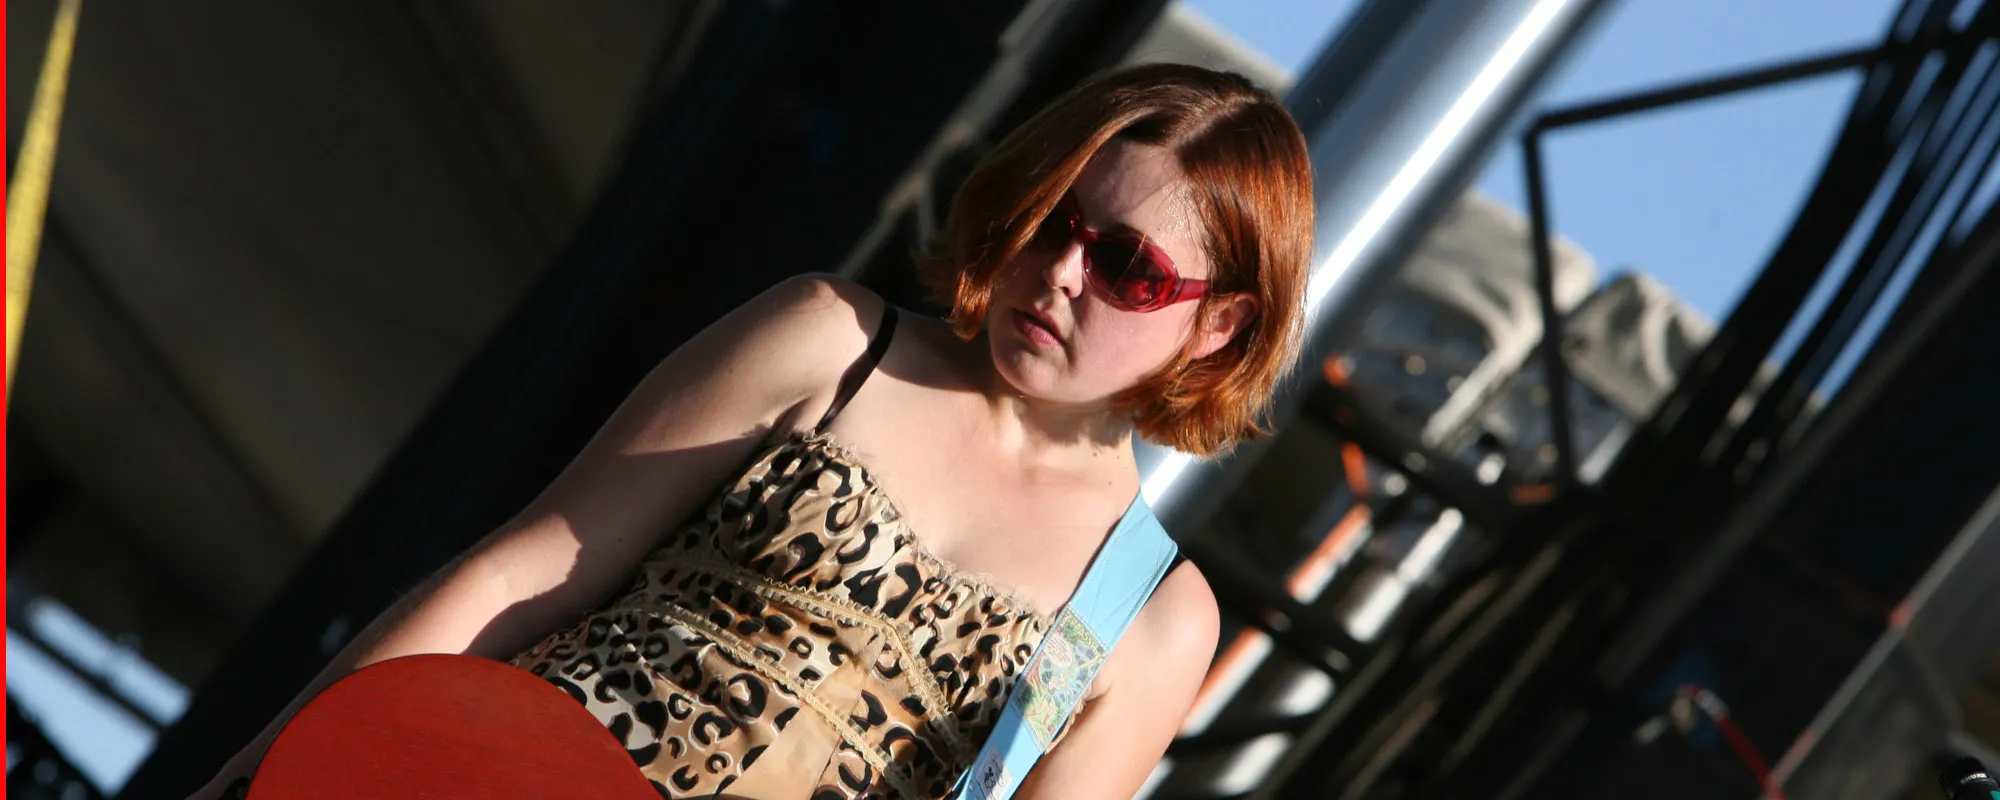 The 20 Best Corin Tucker (Sleater-Kinney) Quotes